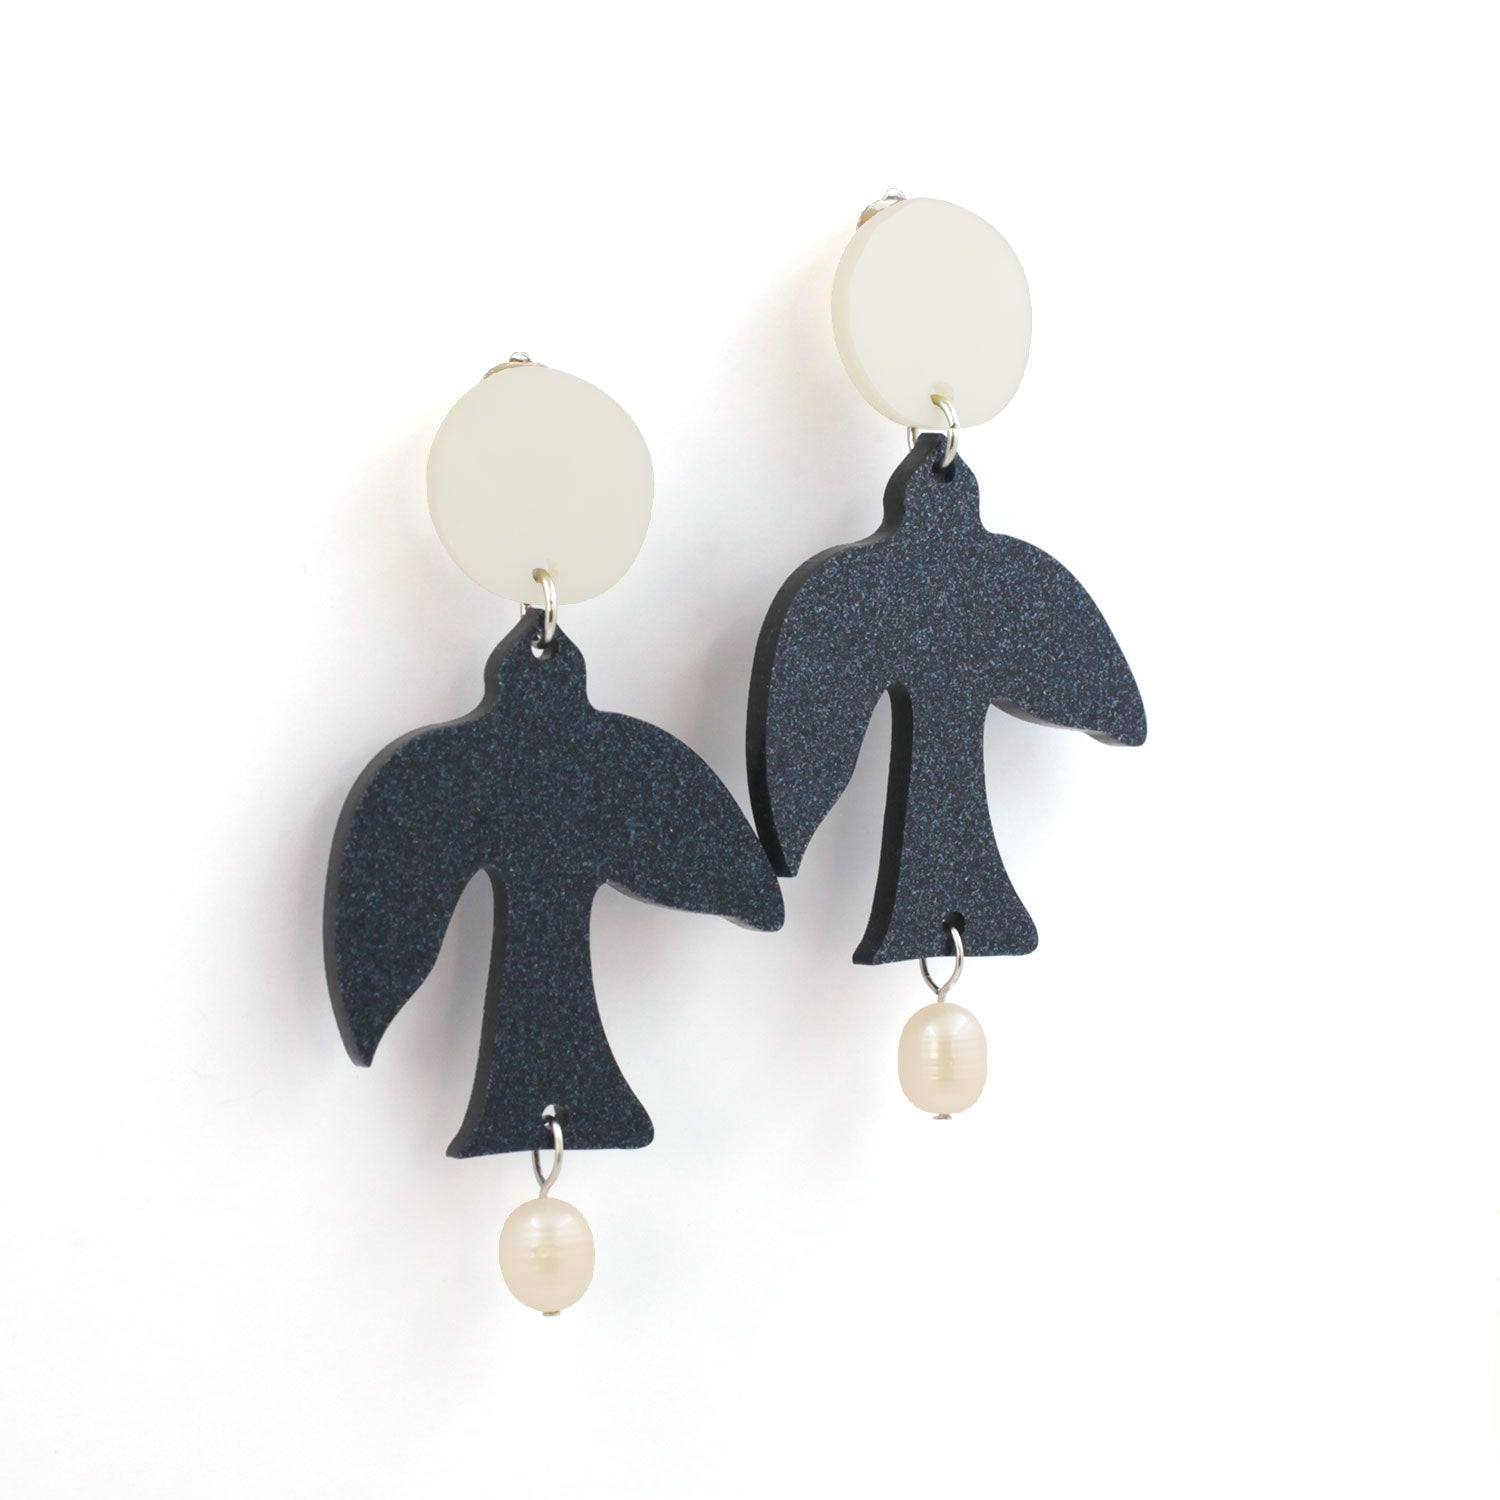 This is a pair earrings. there are glitter dark blue birds with two freshwater pearls hanging from the tail and a white round piece on top. the background is white. 